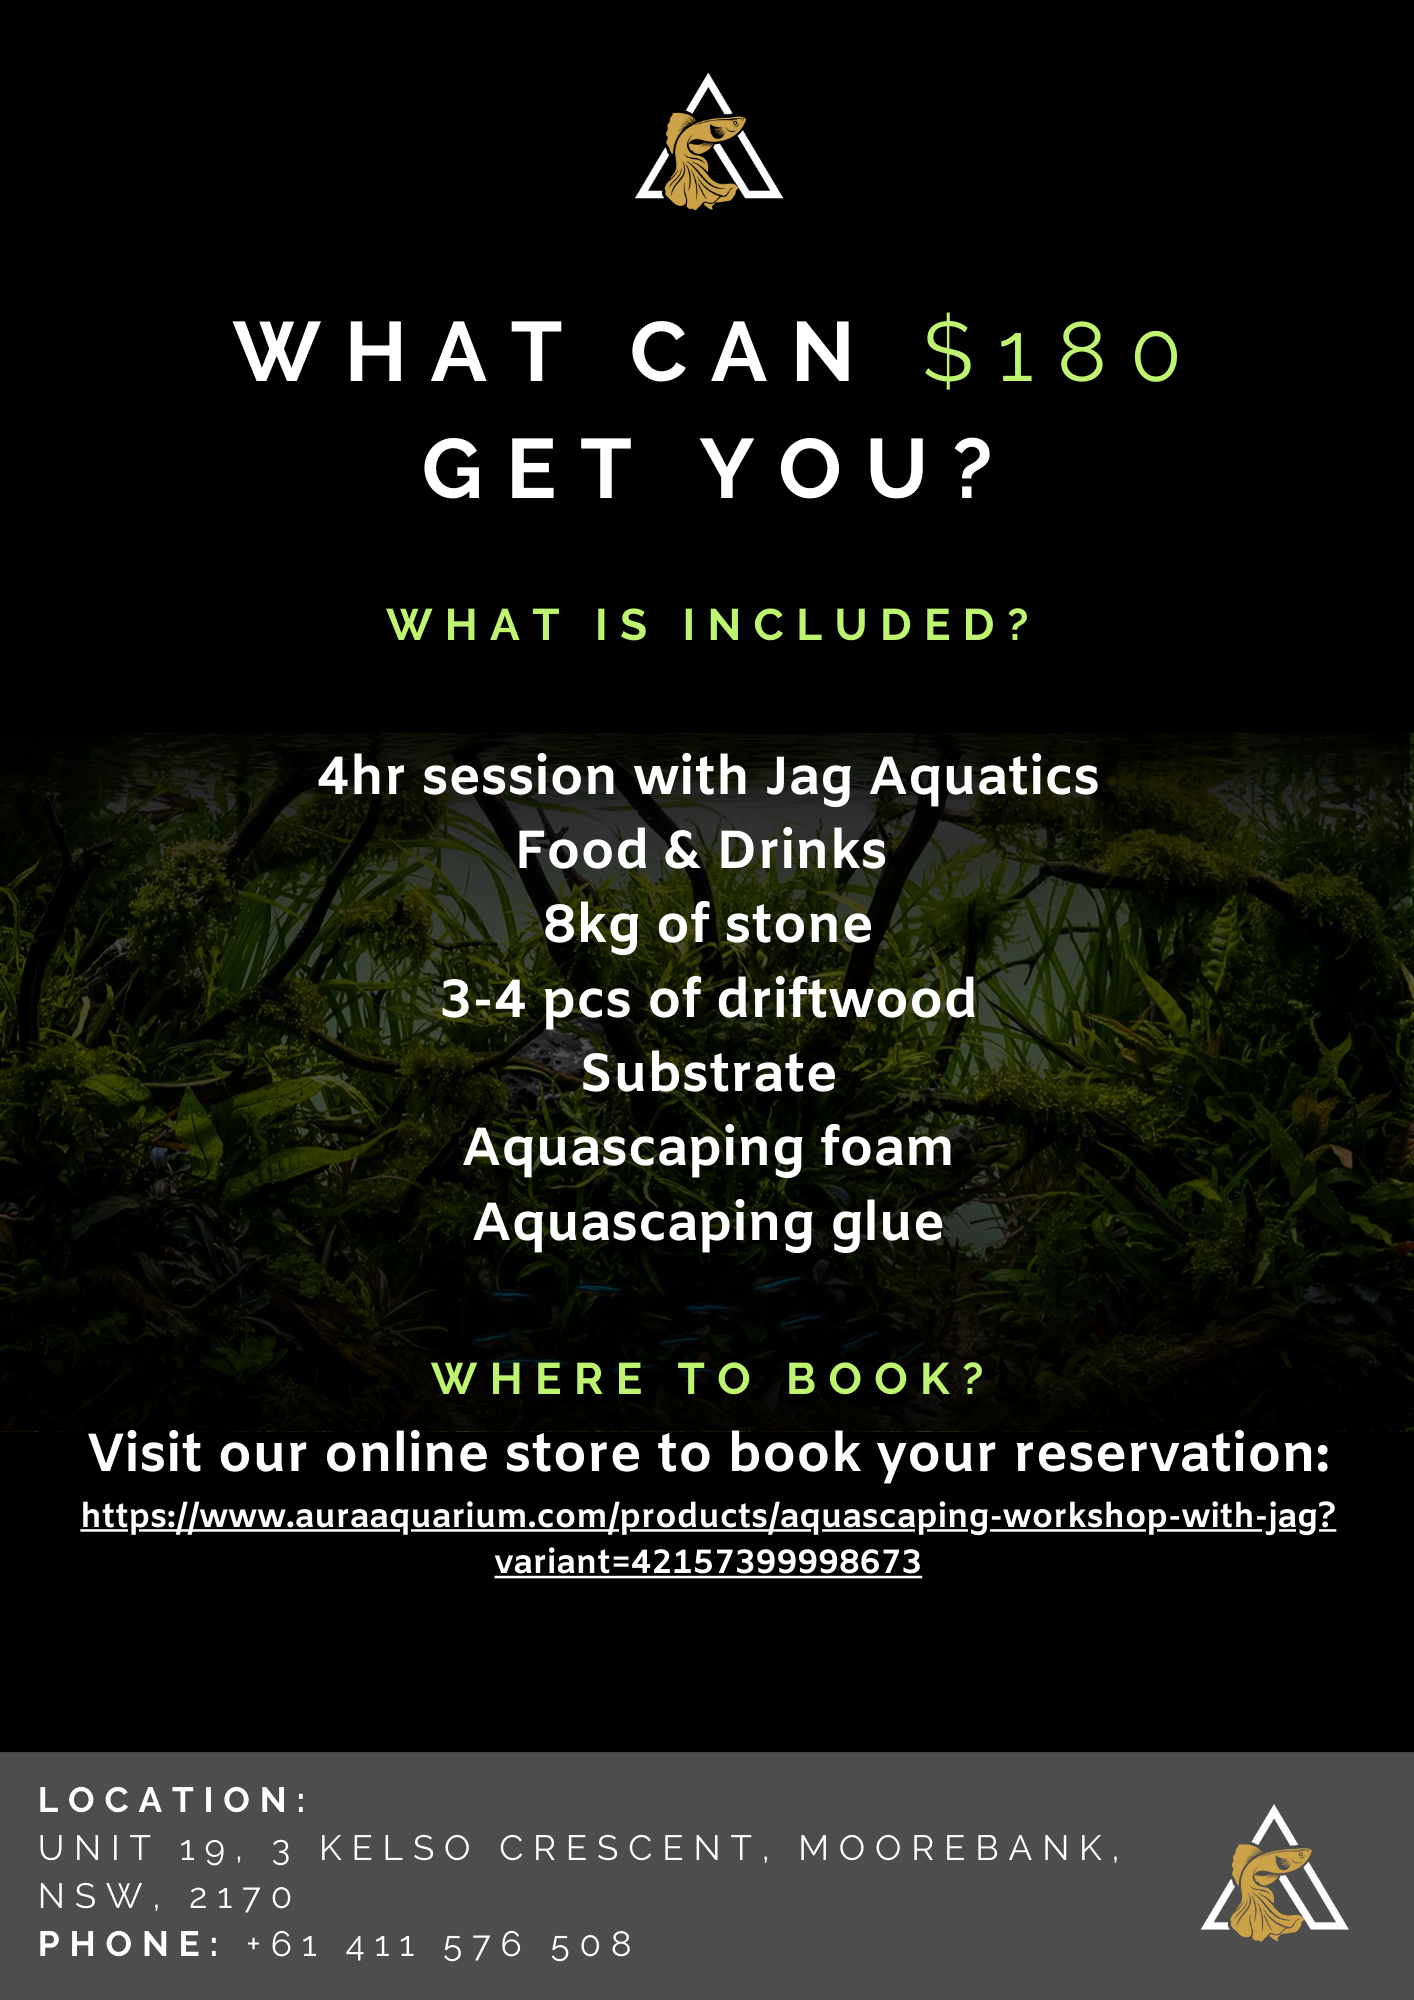 Aquascaping Workshop with Jag